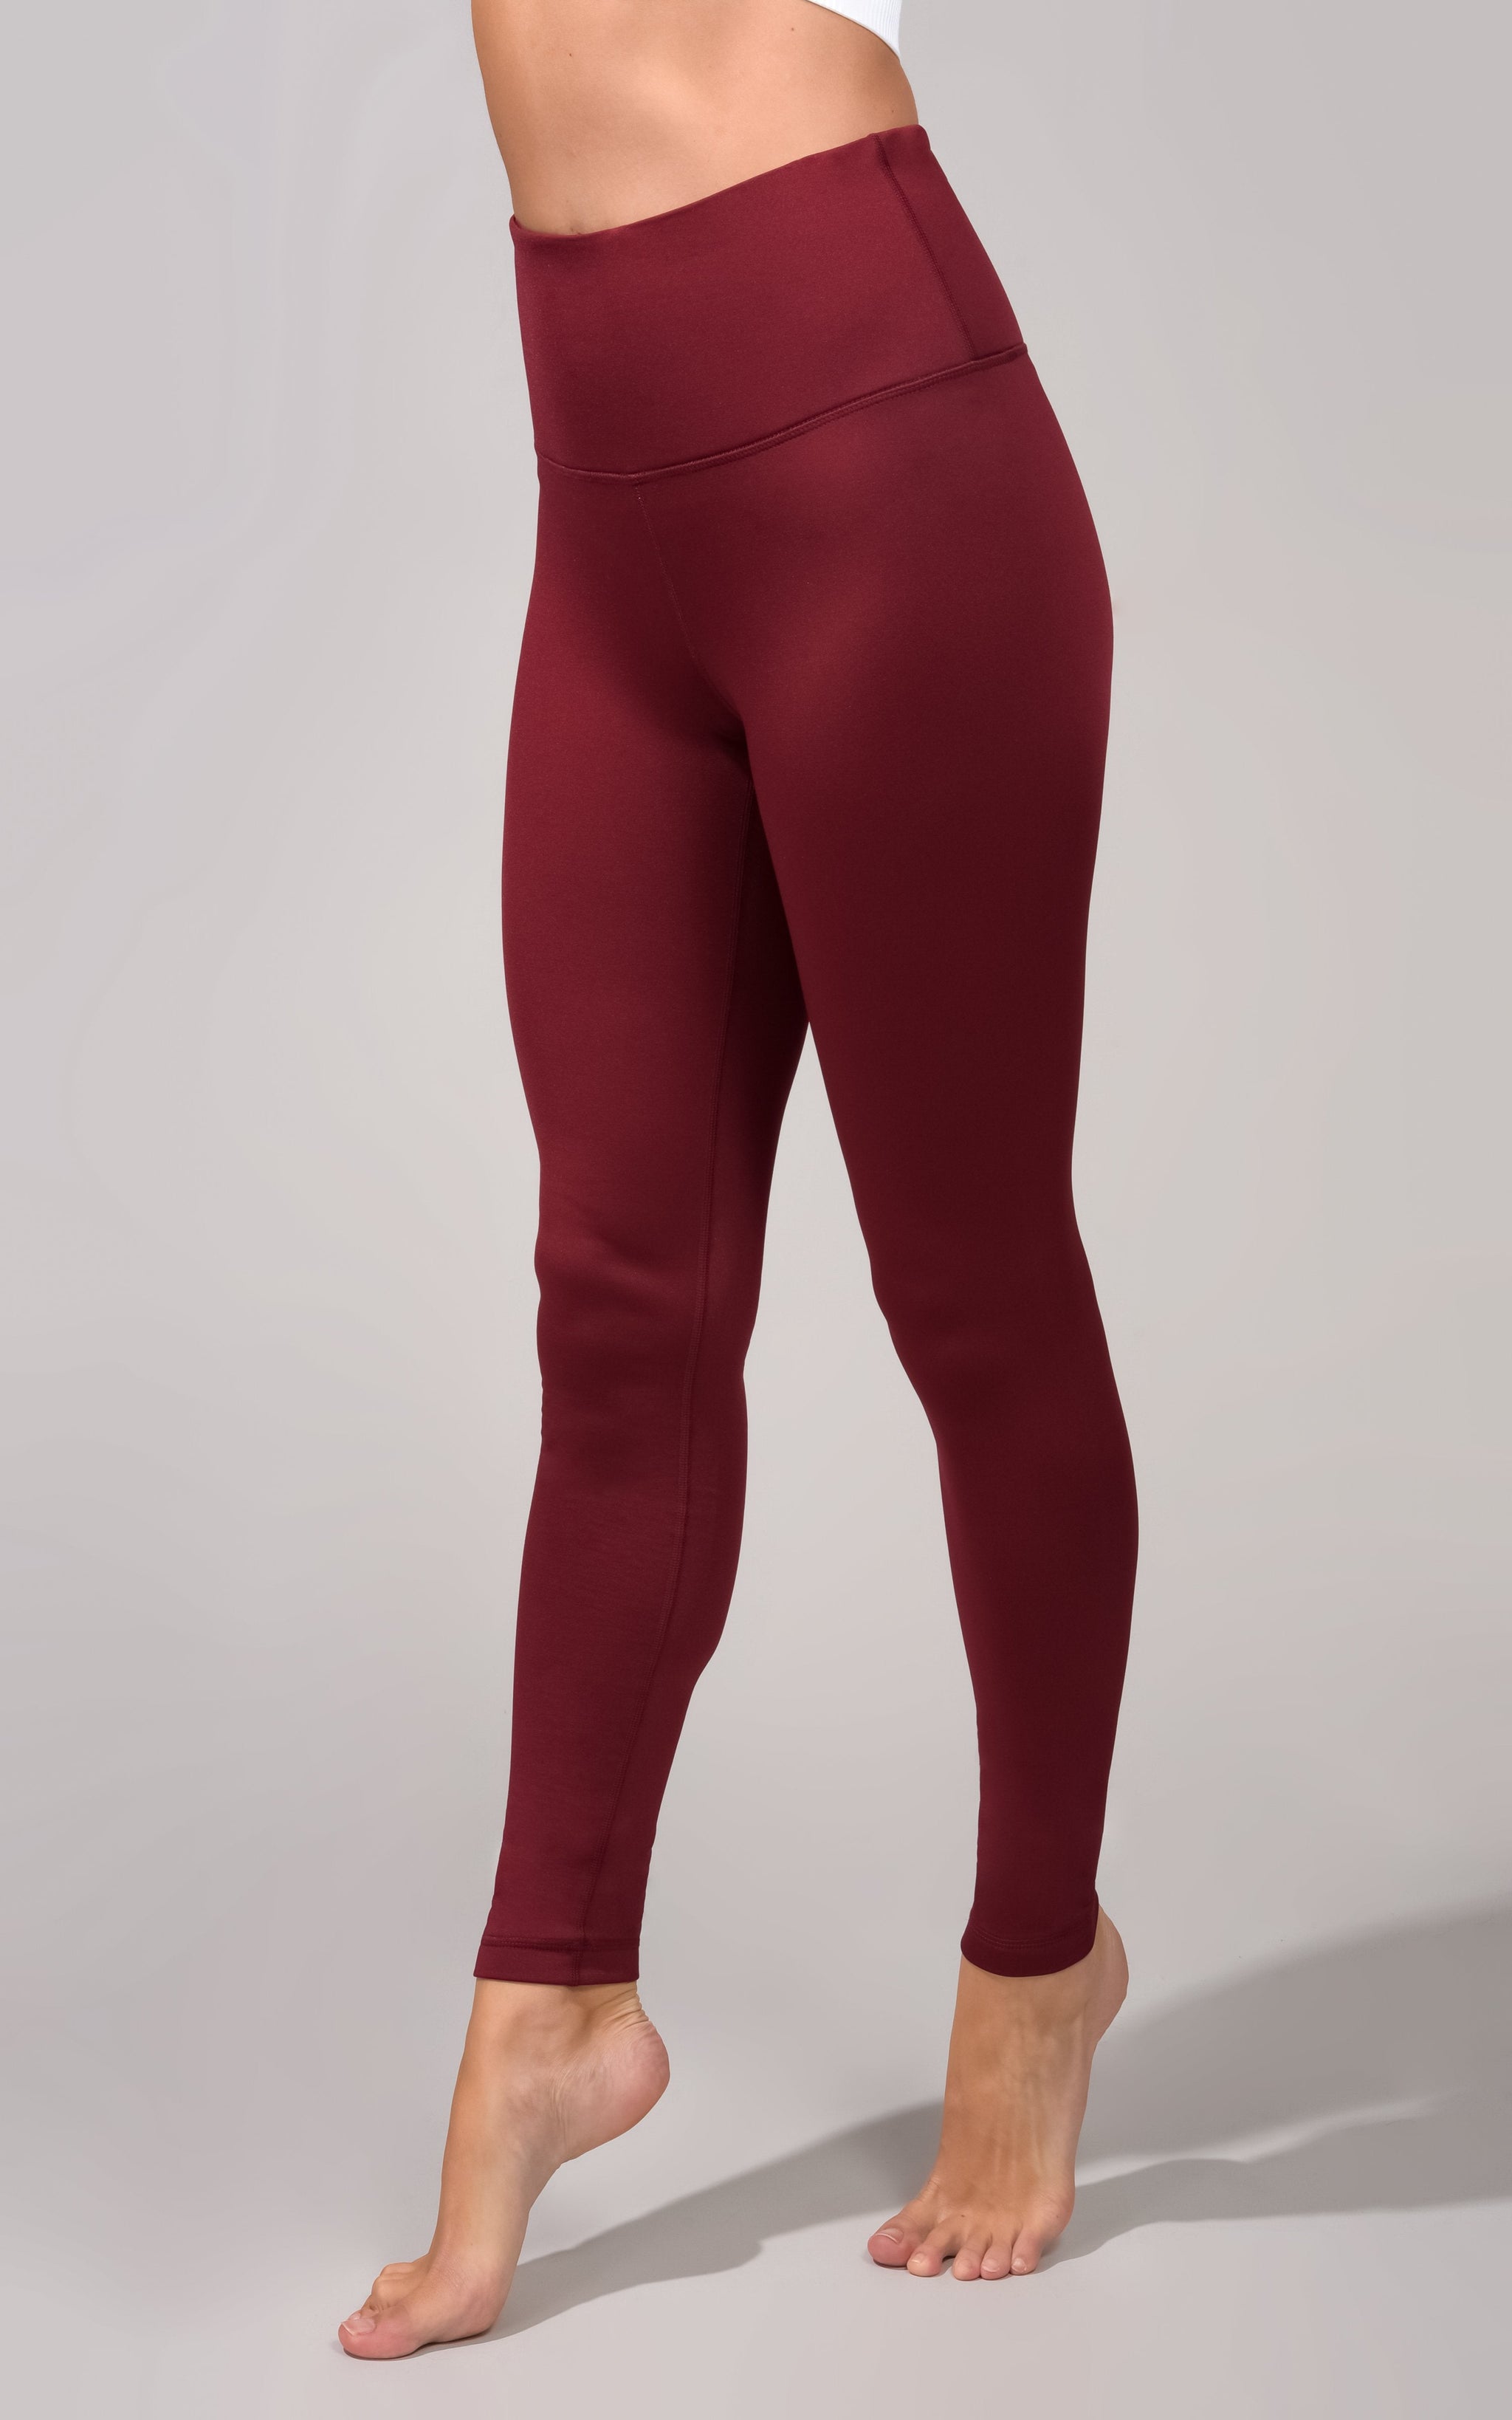 Fashion Look Featuring Time And Tru Tops And Lee Leggings, 59% OFF